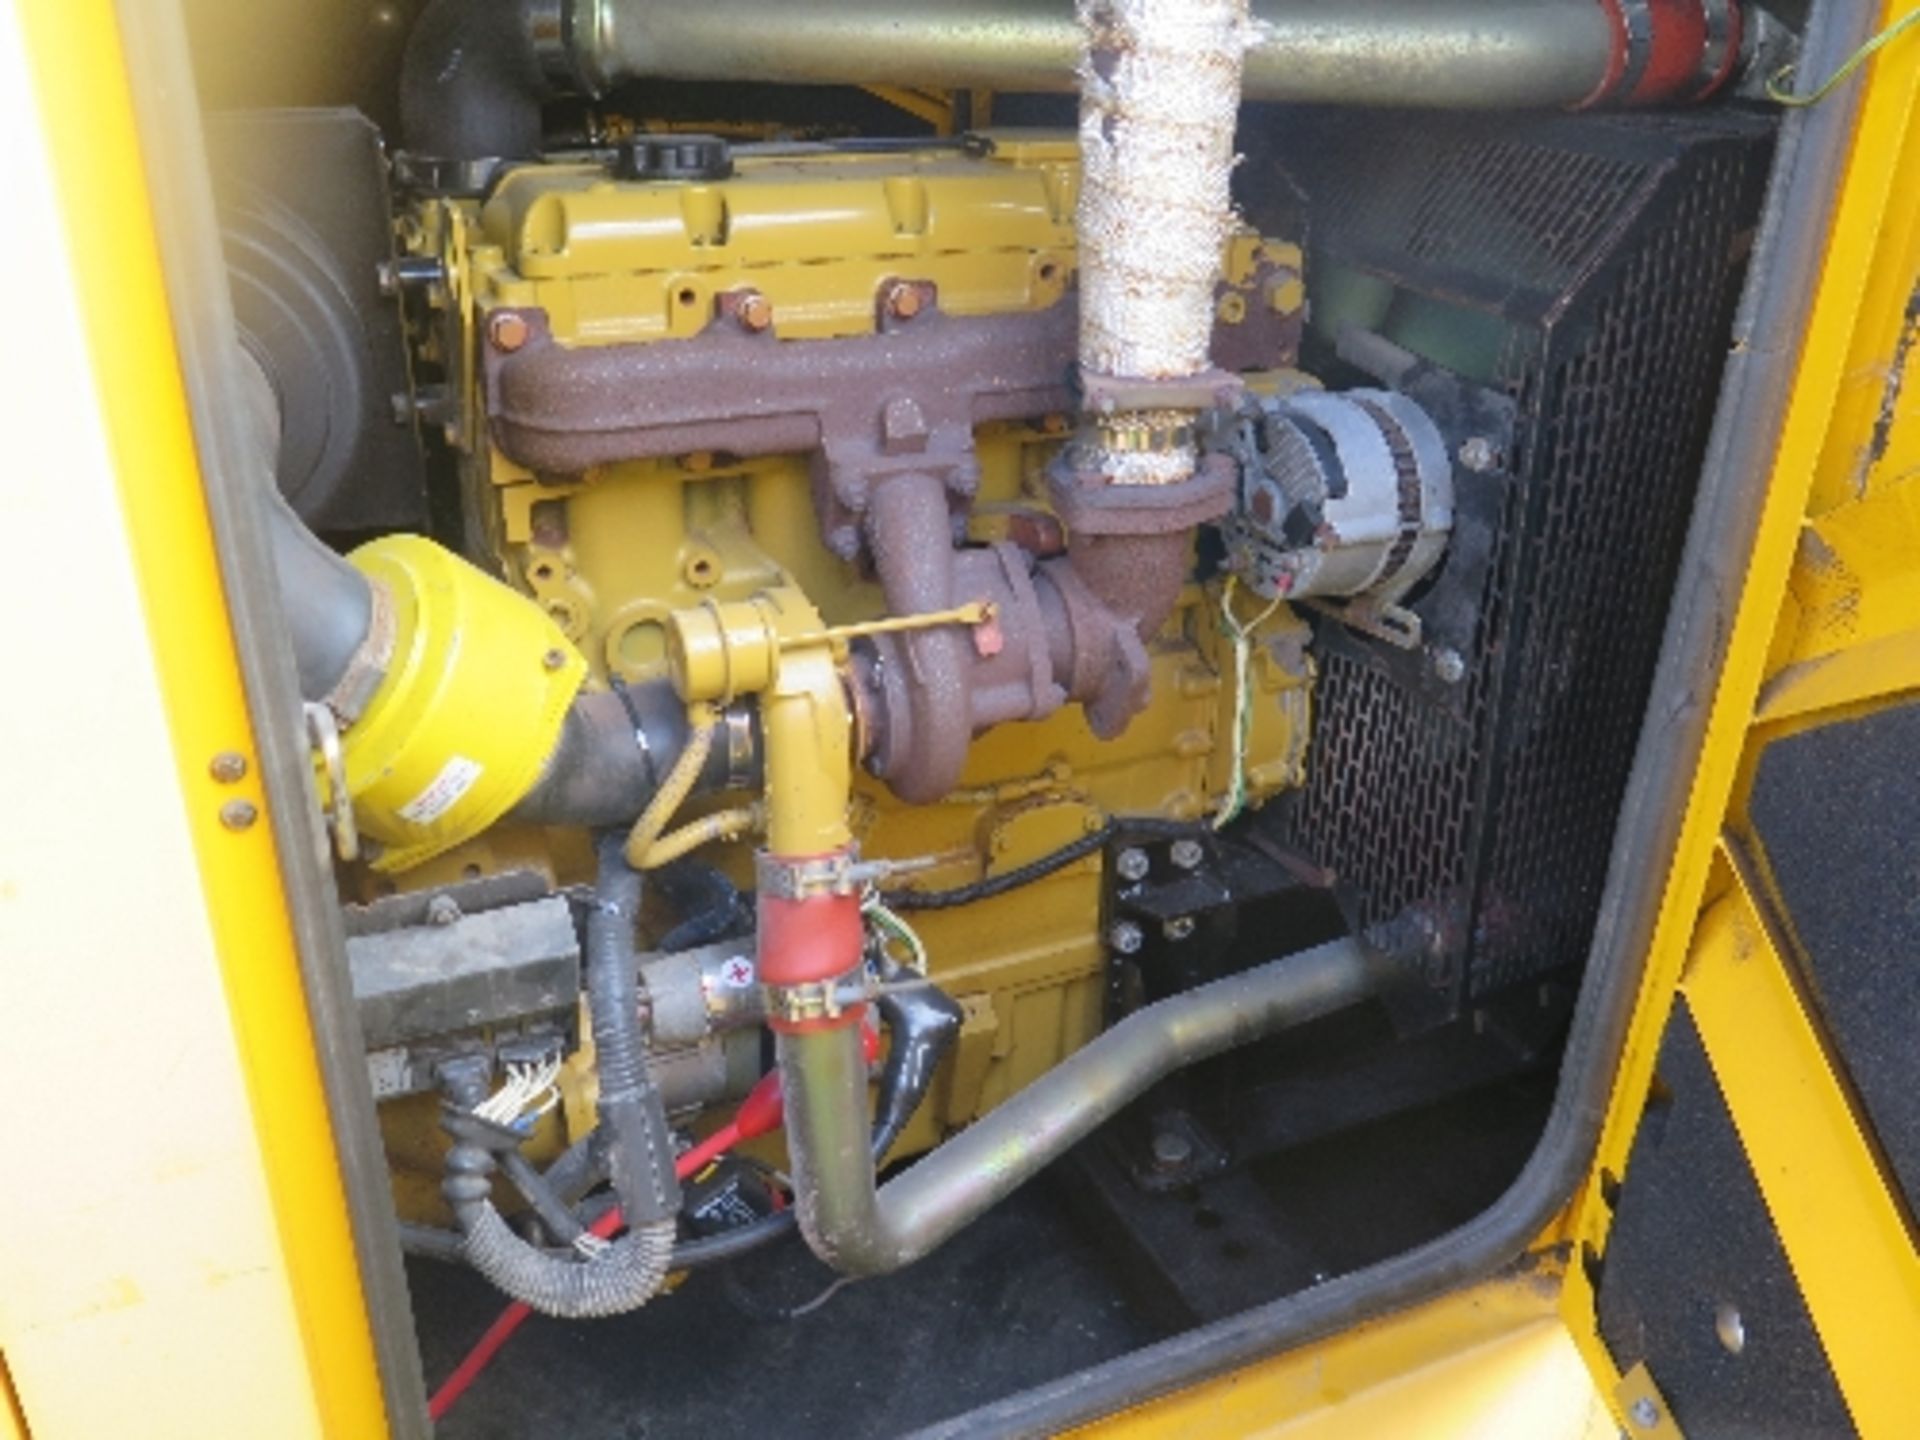 Caterpillar XQE100 generator 158072 12811 hrs
PERKINS - RUNS AND MAKES POWER
ALL LOTS are SOLD - Image 6 of 6